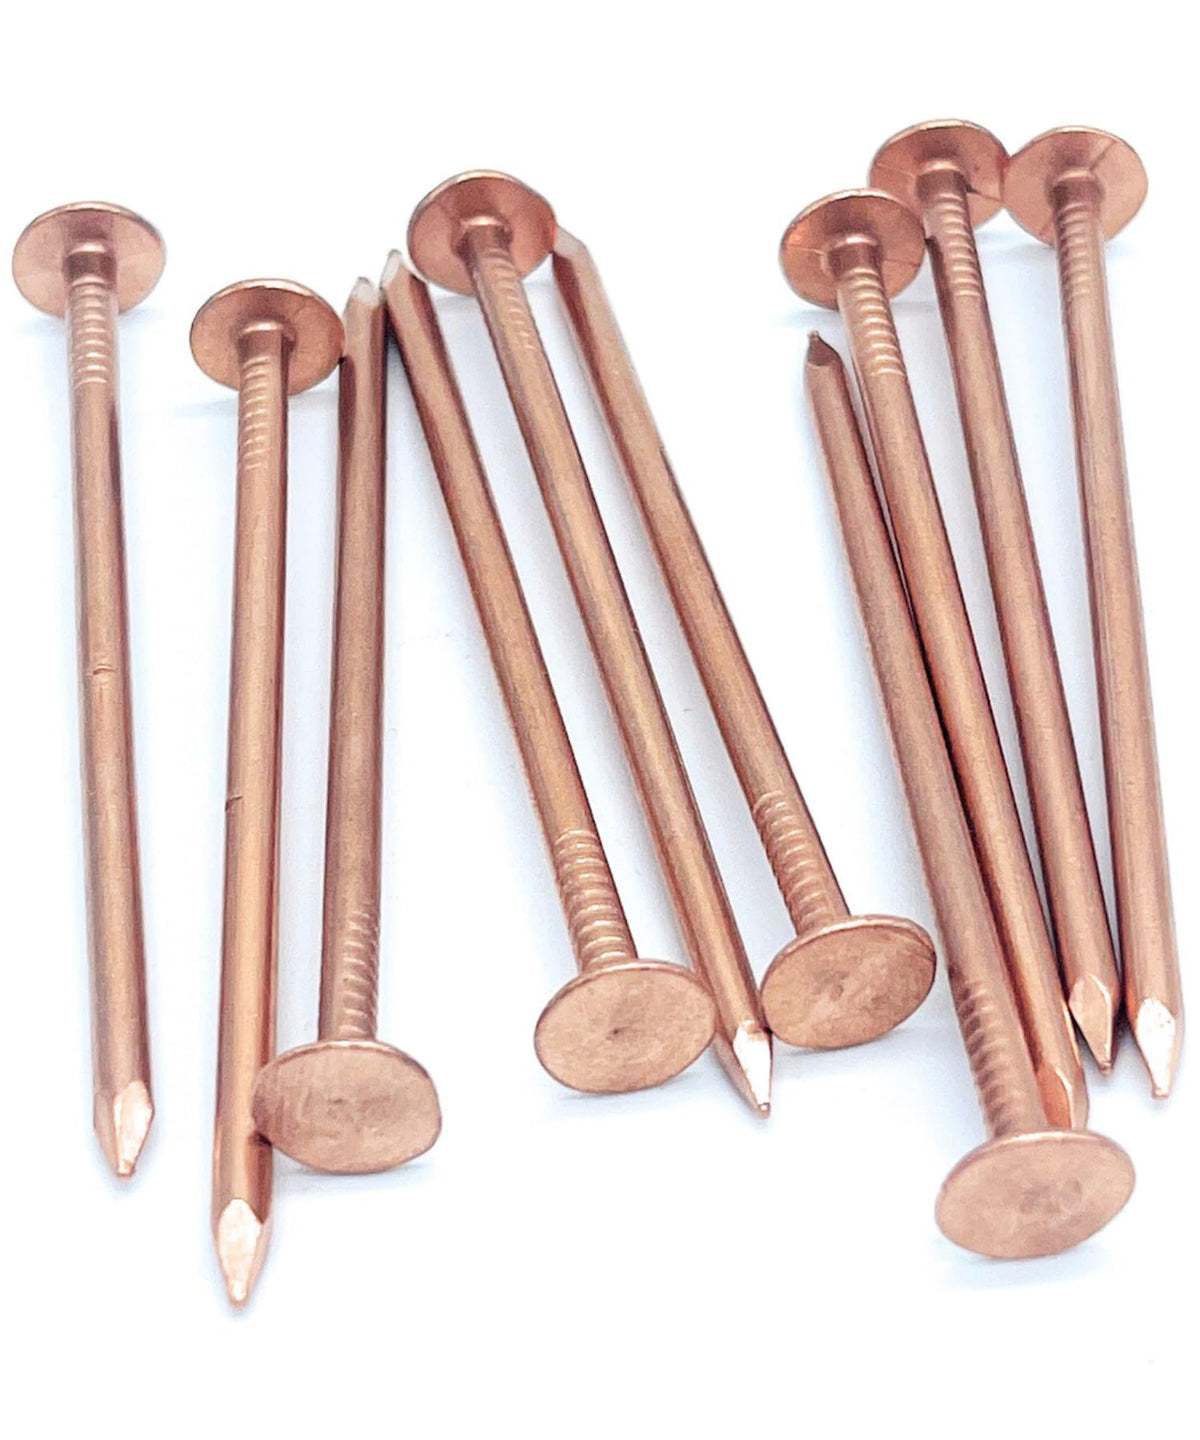 3 Inch Copper Nails Roofing Finish Nails USA MADE - Solid Pure Copper Slating Nails Spikes Flashing Furniture Boat - Package Includes The Highest Quality Copper Nails by Dubbs Hardware